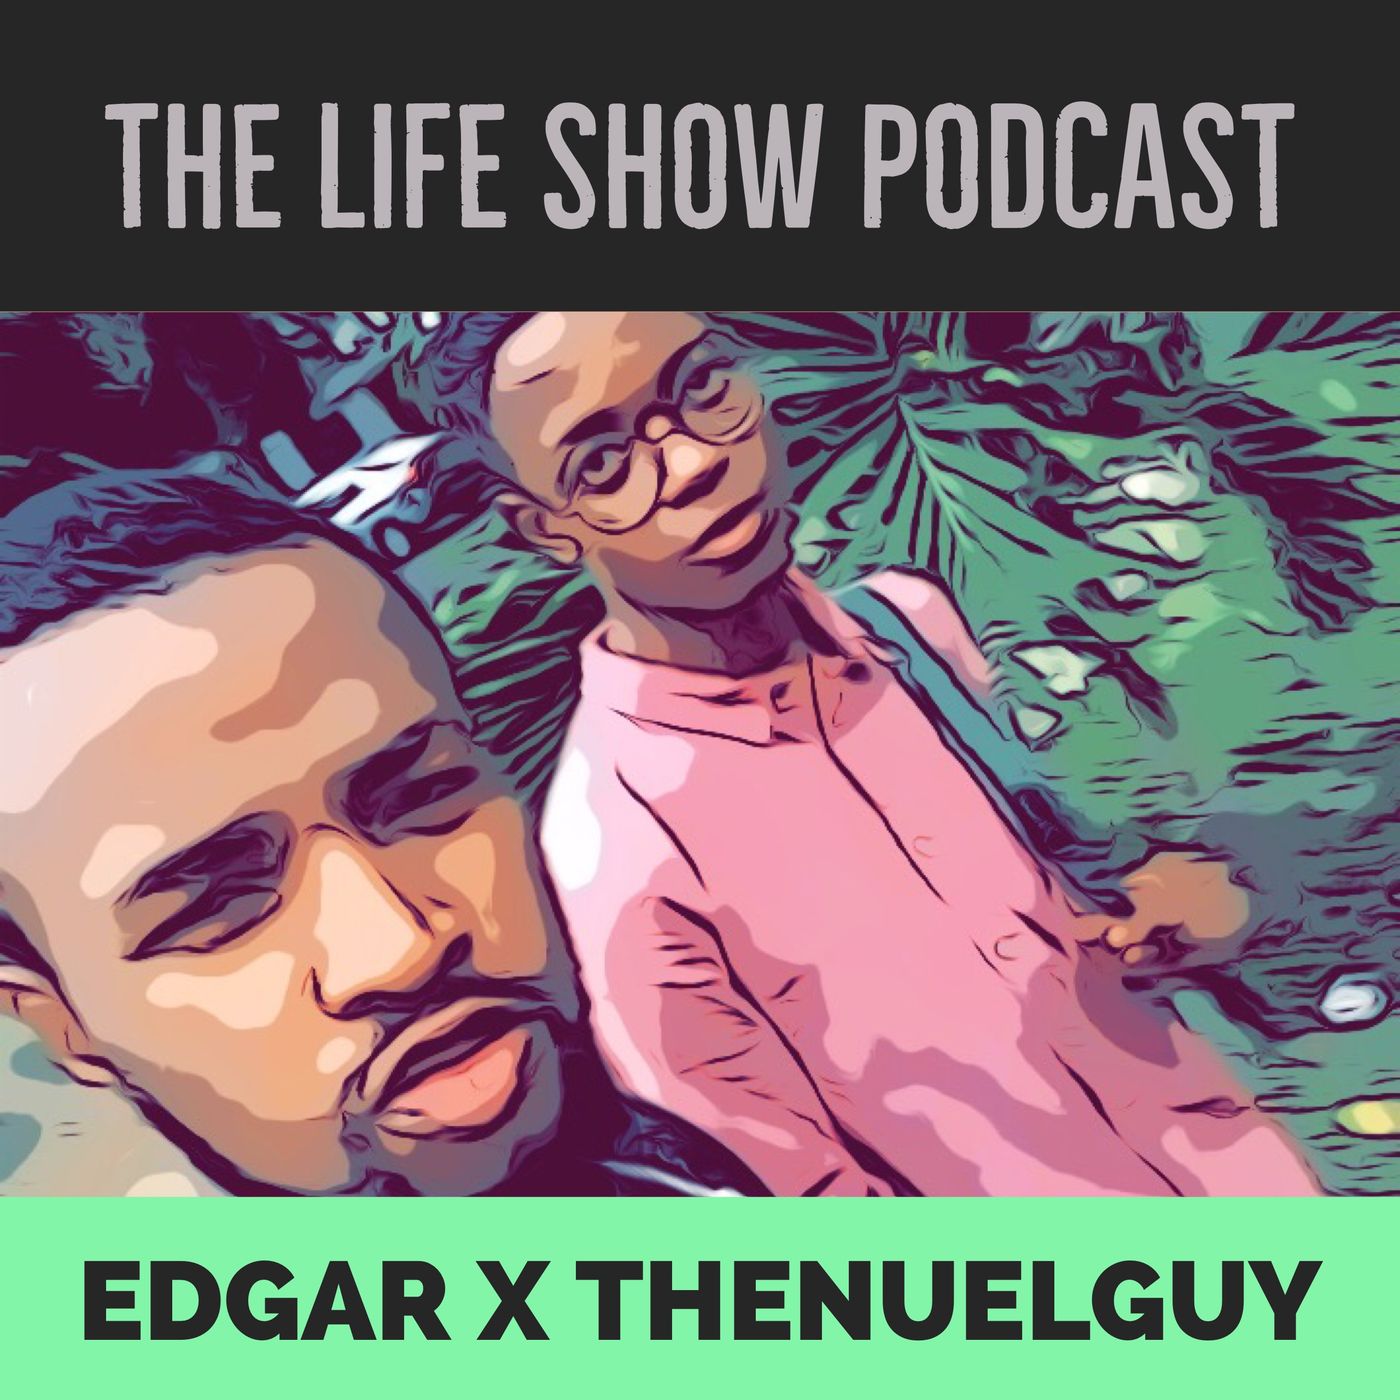 THE LIFE SHOW PODCAST